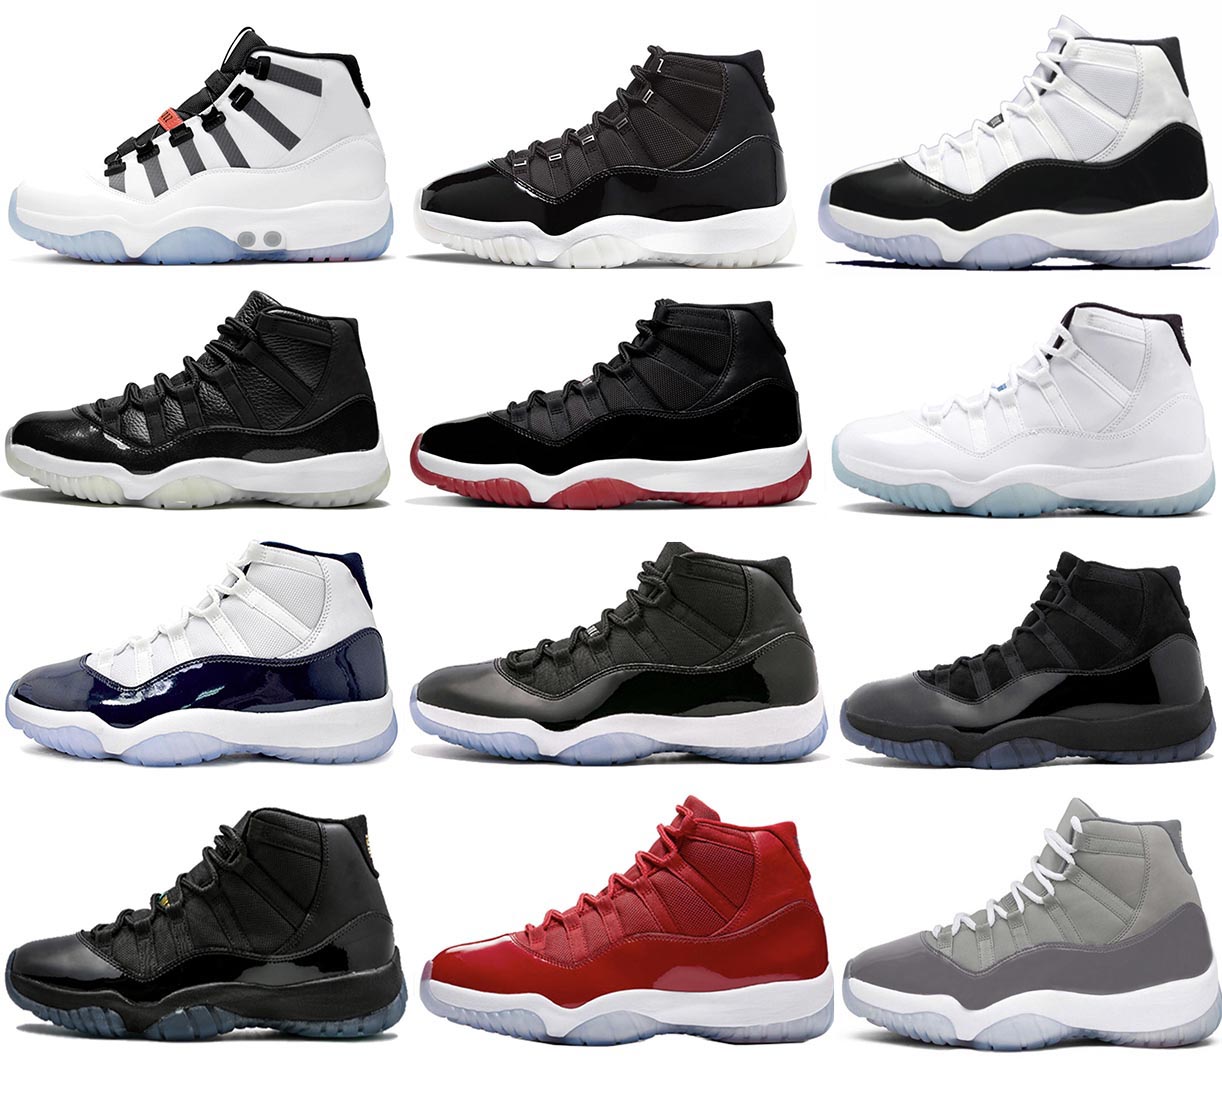 

2021 Release Authentic Jumpman 11 Shoes Jubilee Space Jam 45 Concord Gamma Blue Adapt The Self-Lacing Cap And Gown Bred Gym Red Men Women Outdoor Sports Sneakers, Cool grey